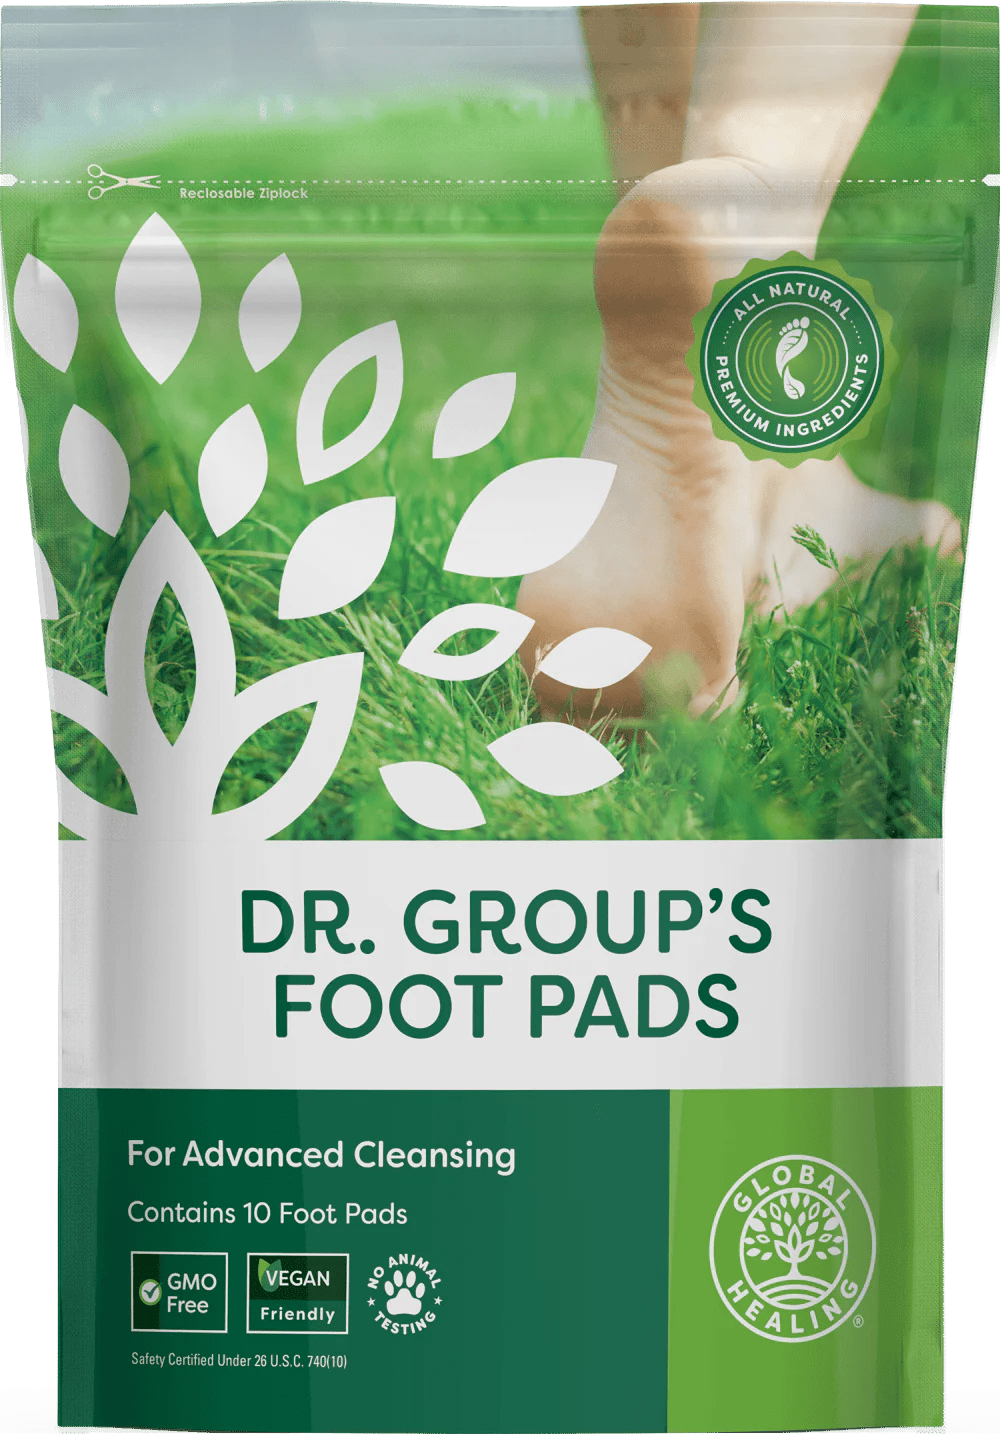 Dr Groups Foot Pads Cantaining 10 foot pads